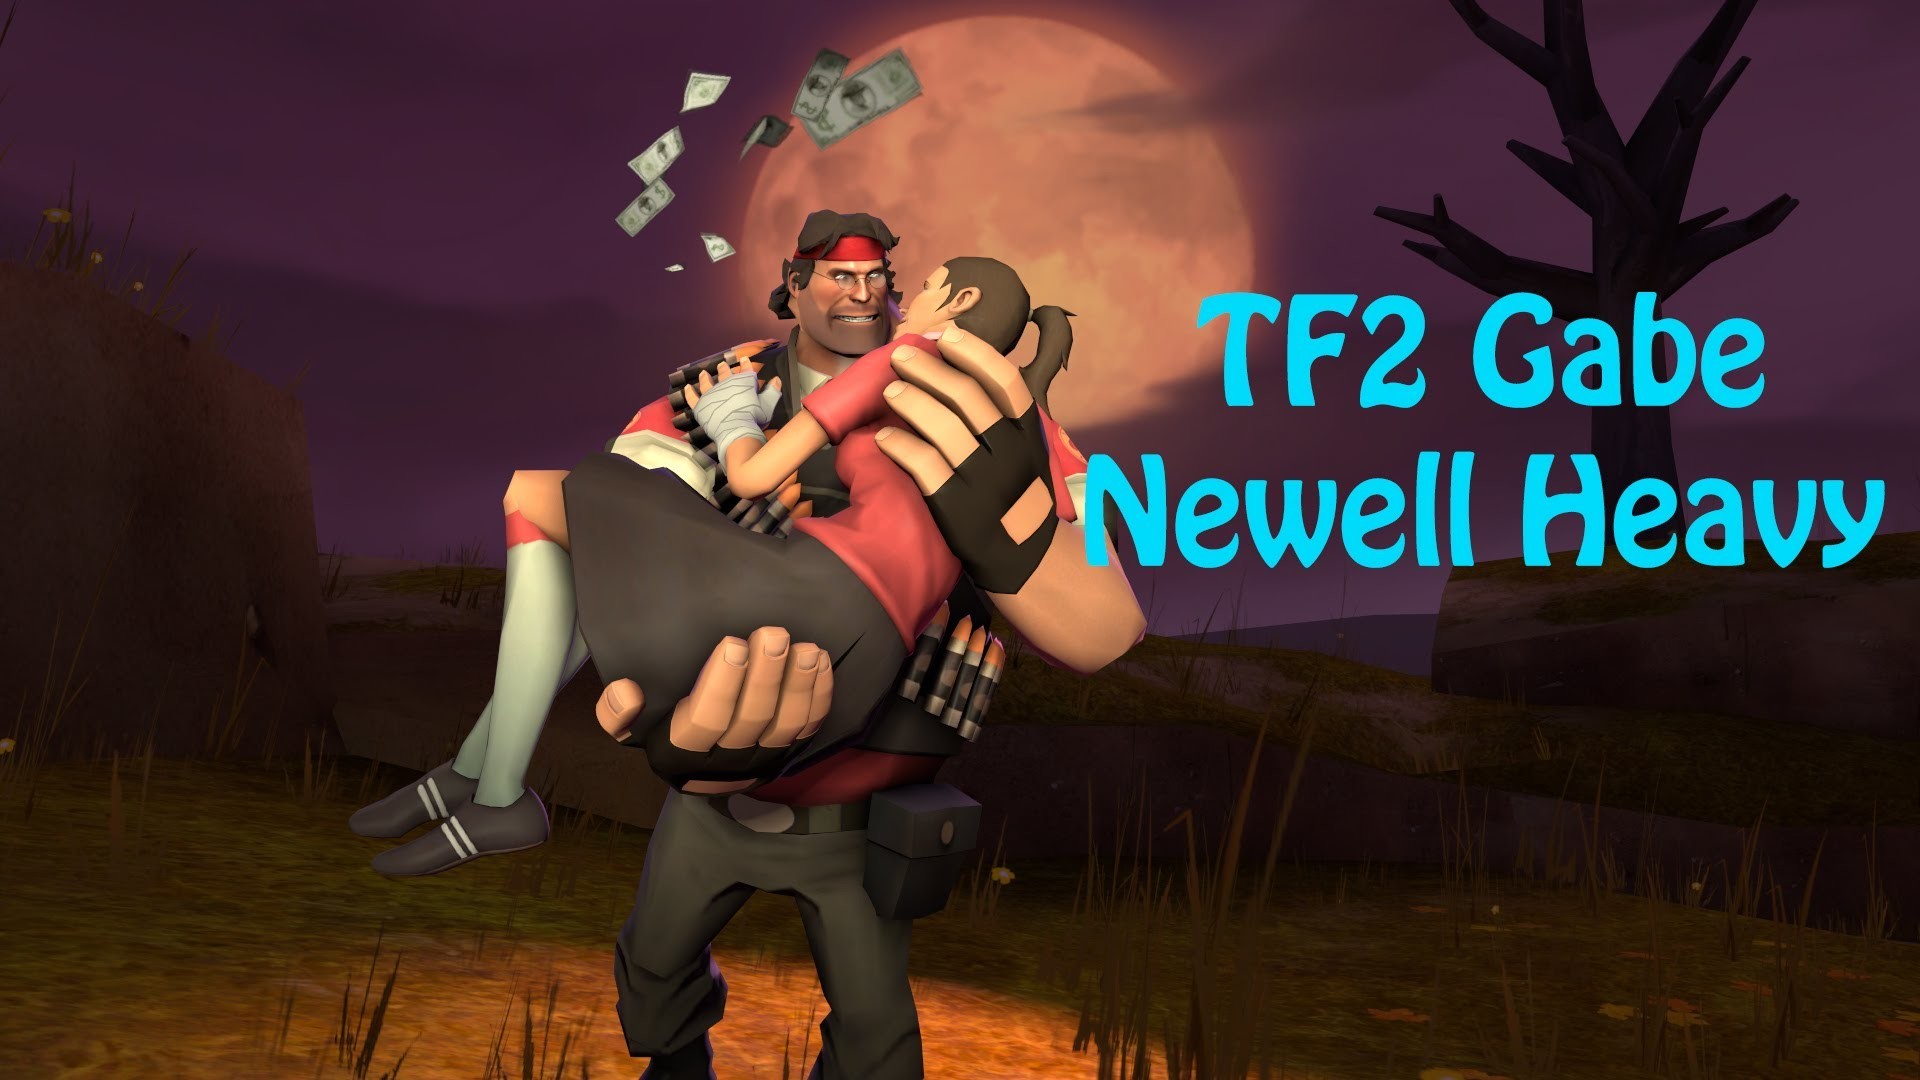 1920x1080 TF2 - Gabe Newell Heavy! Slender Fortress Mod - Team Fortress 2) Ep7 -  YouTube